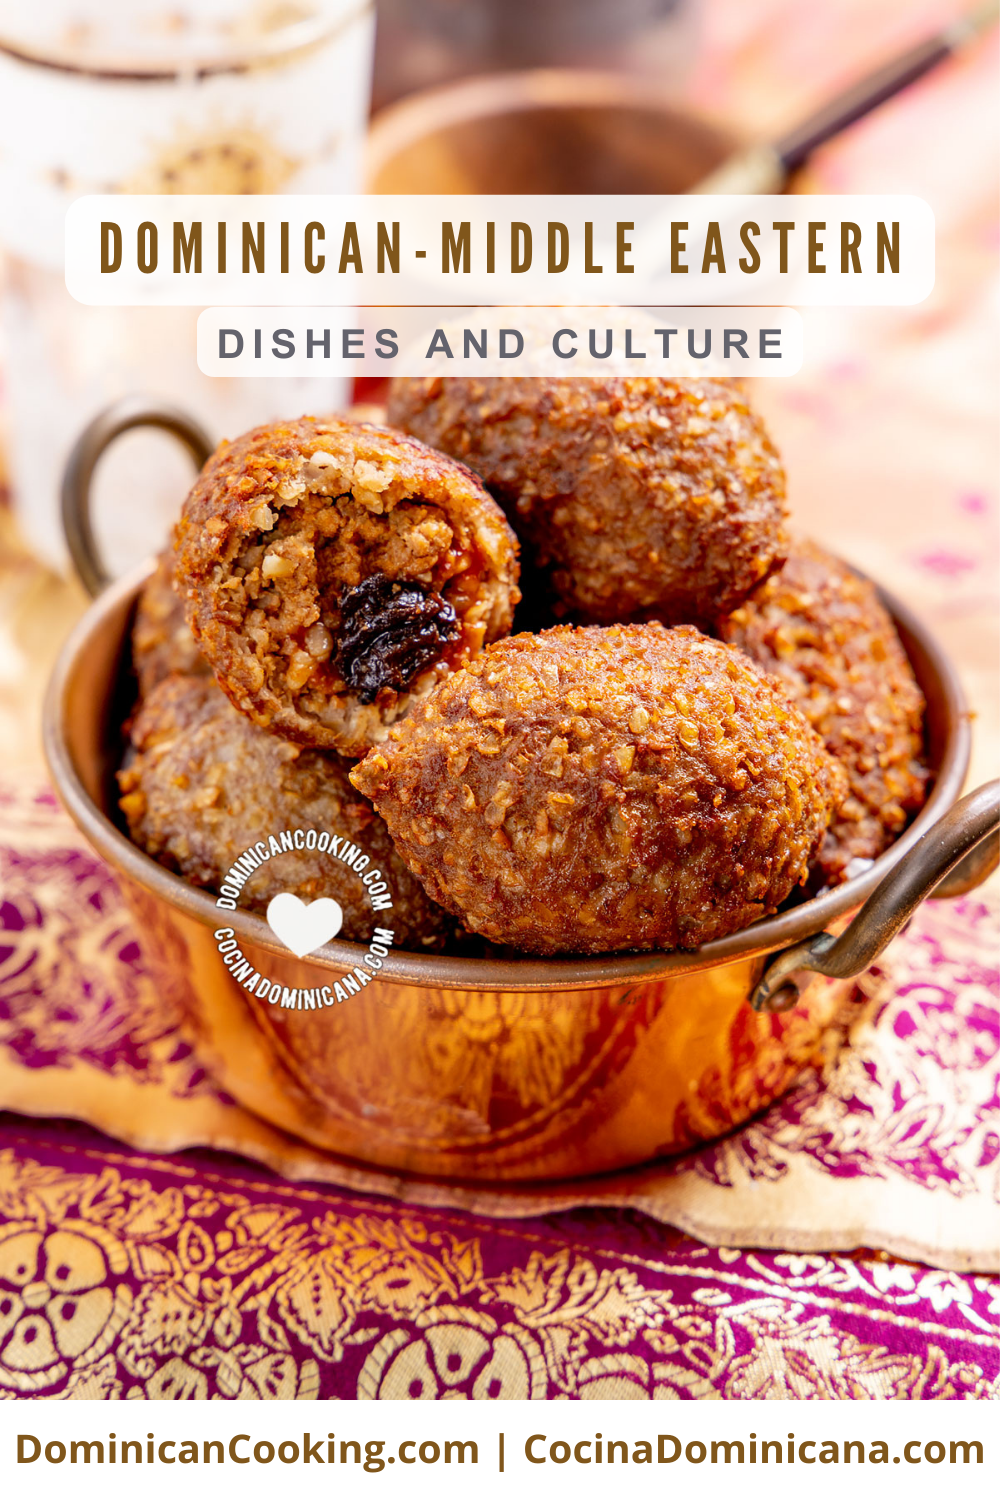 Dominican-Middle-Eastern culture, history and food.